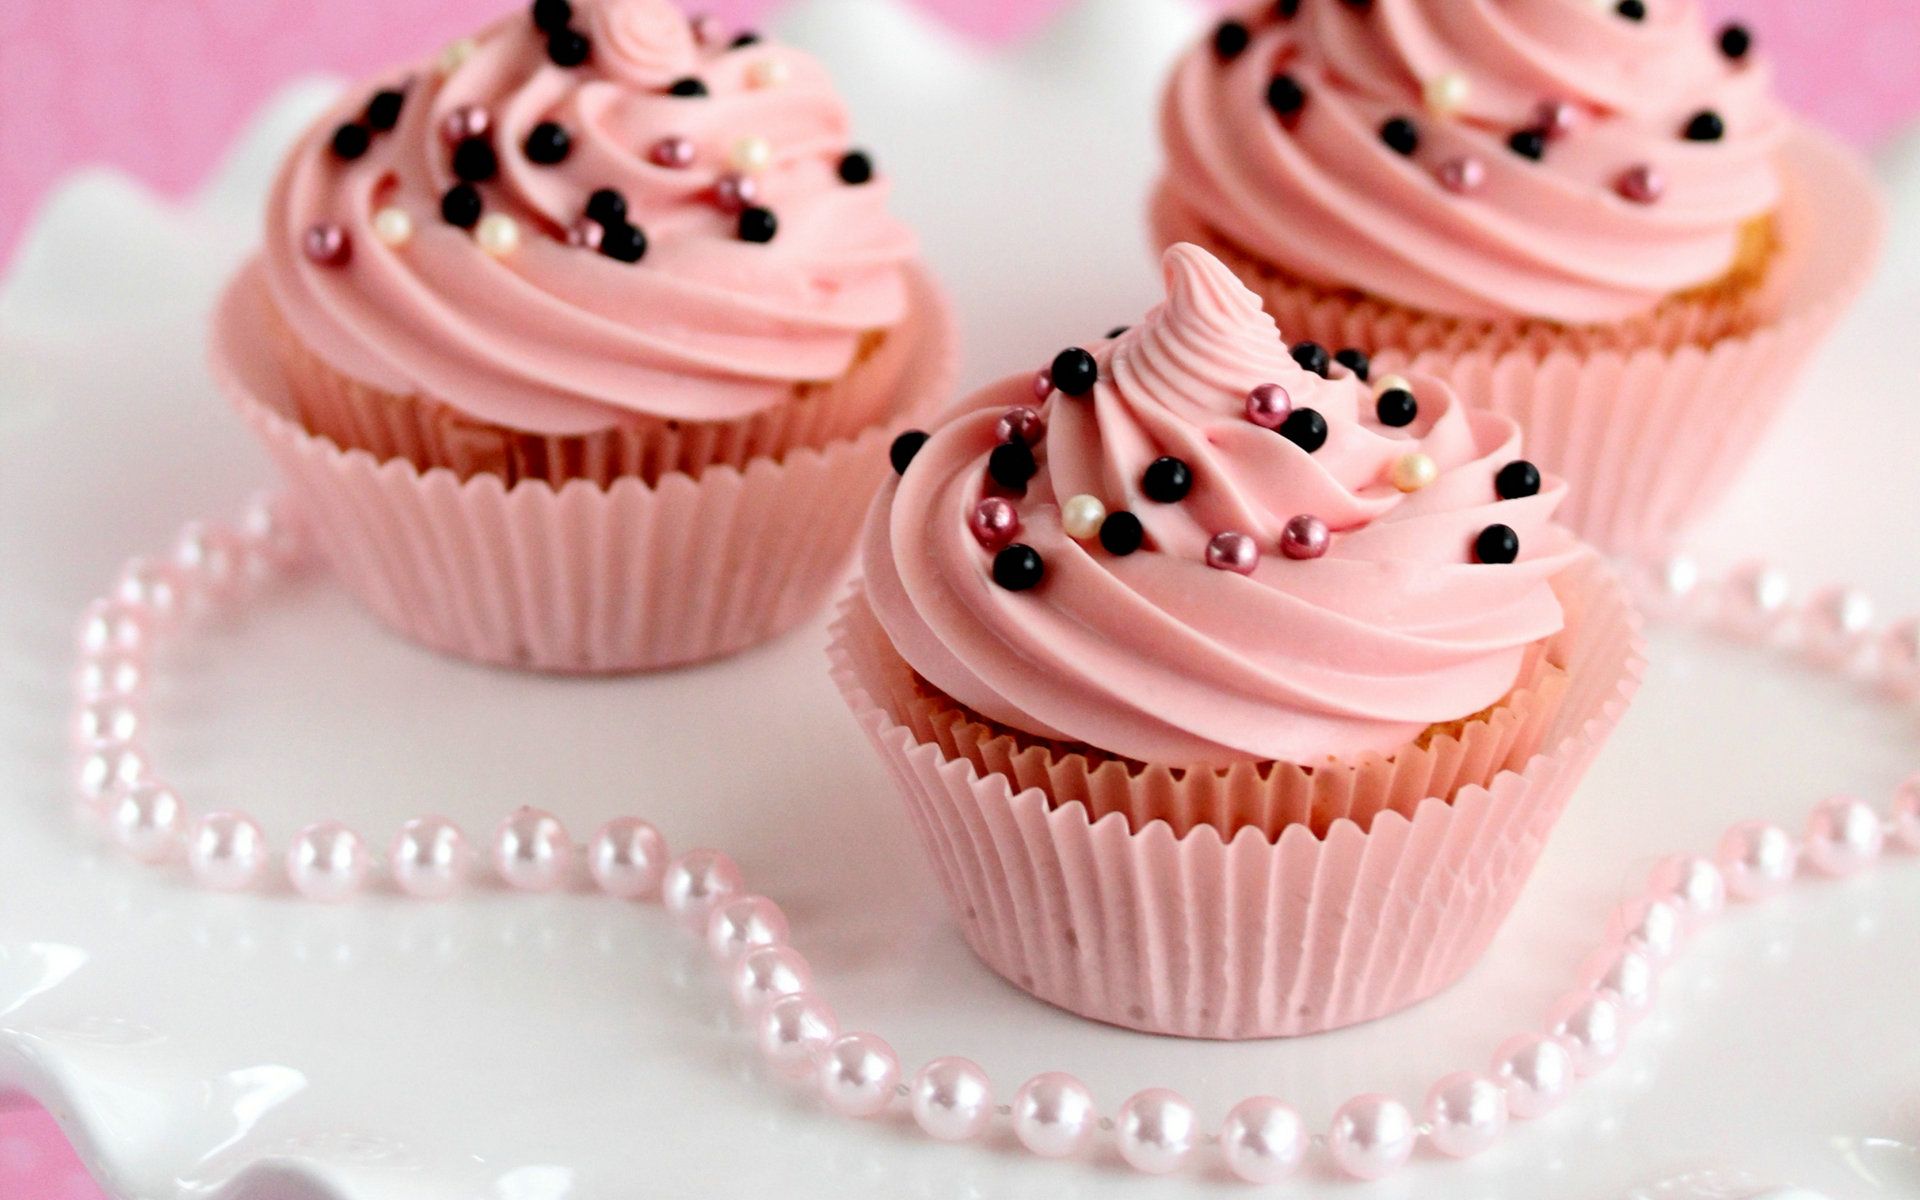 Cakes And Cupcakes Wallpapers - Wallpaper Cave